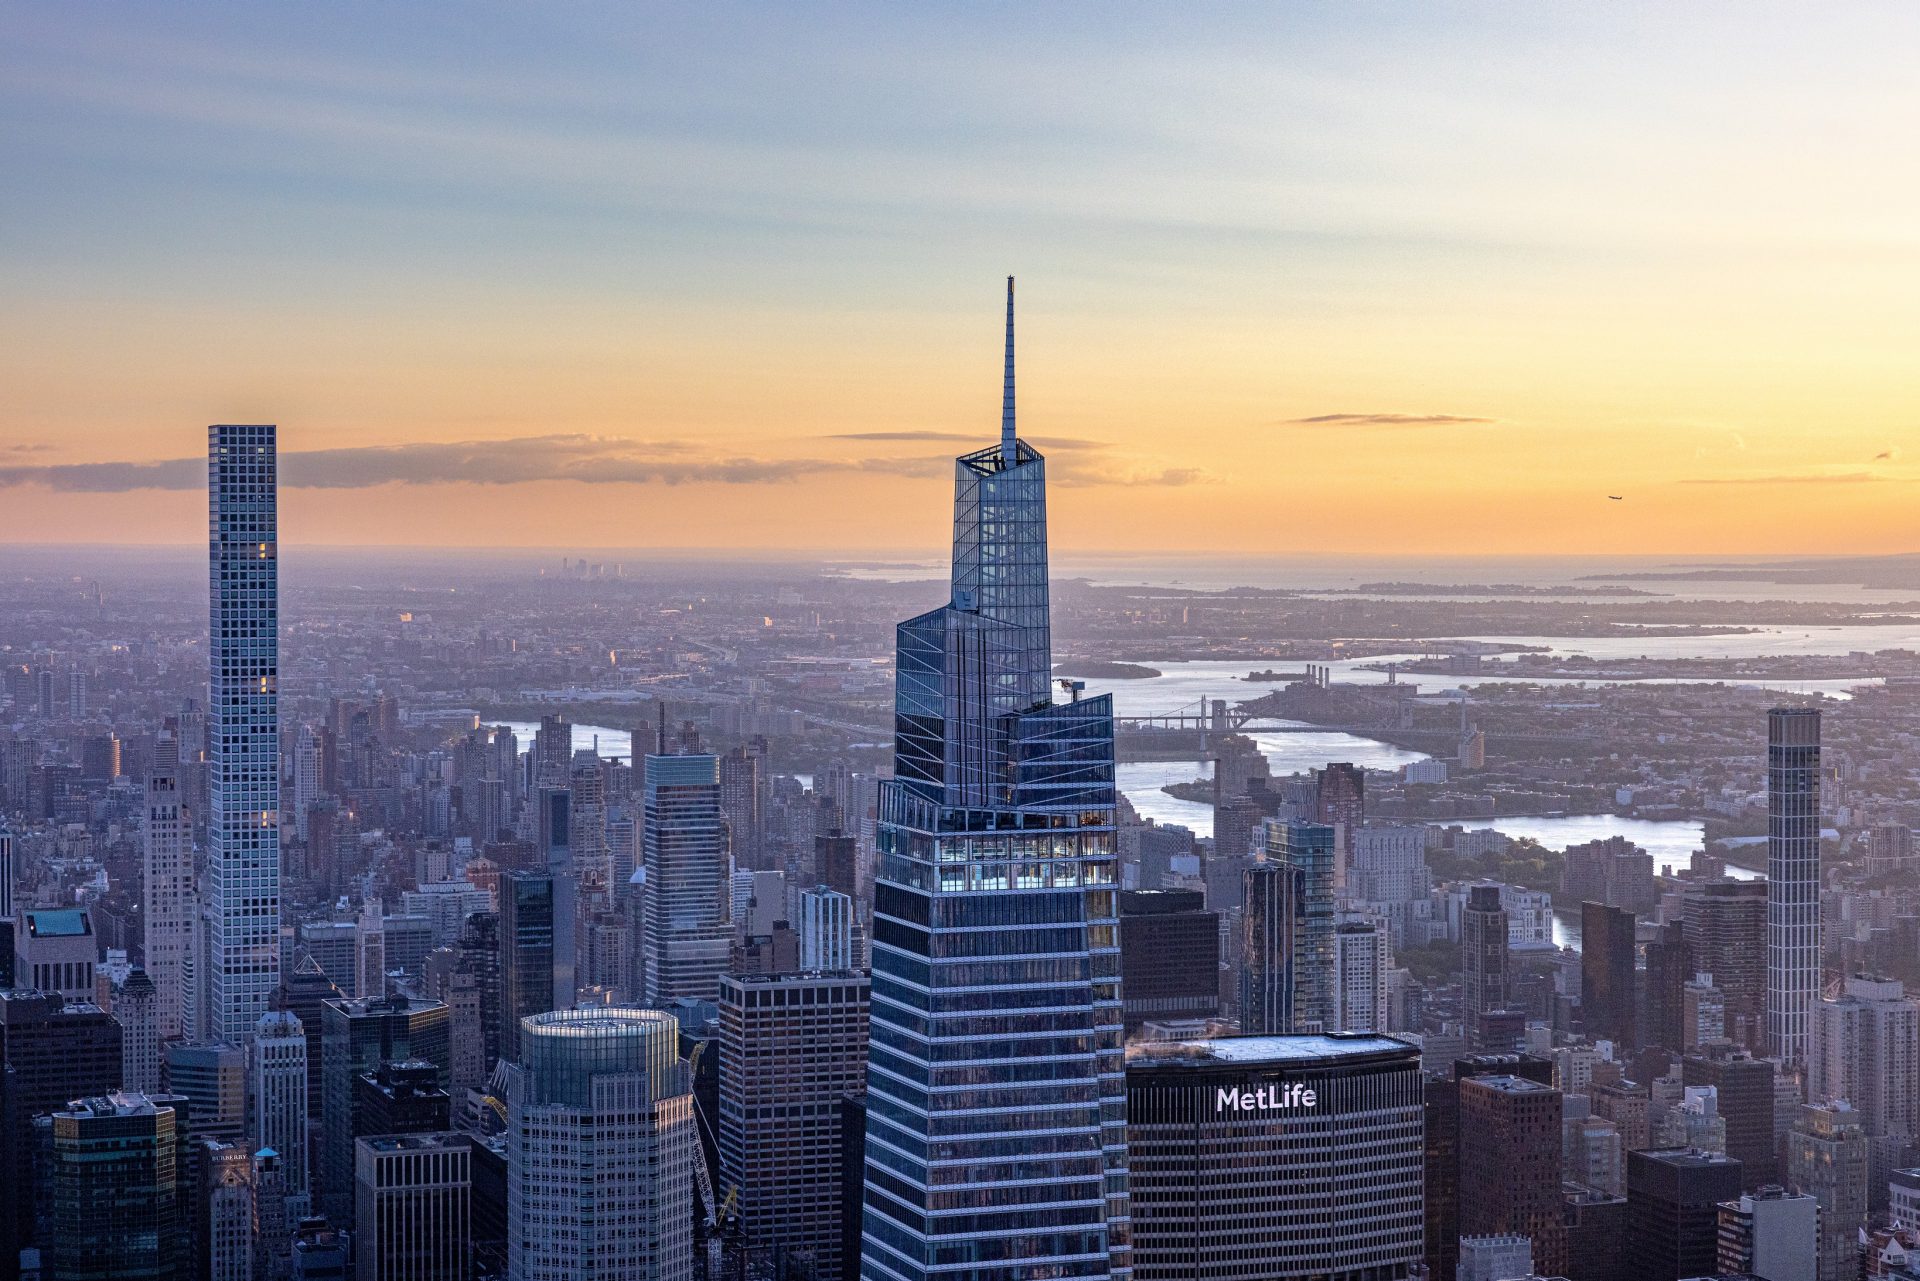 A view on the skyline of Manhattan, New York City, where the DZ BANK branch is located